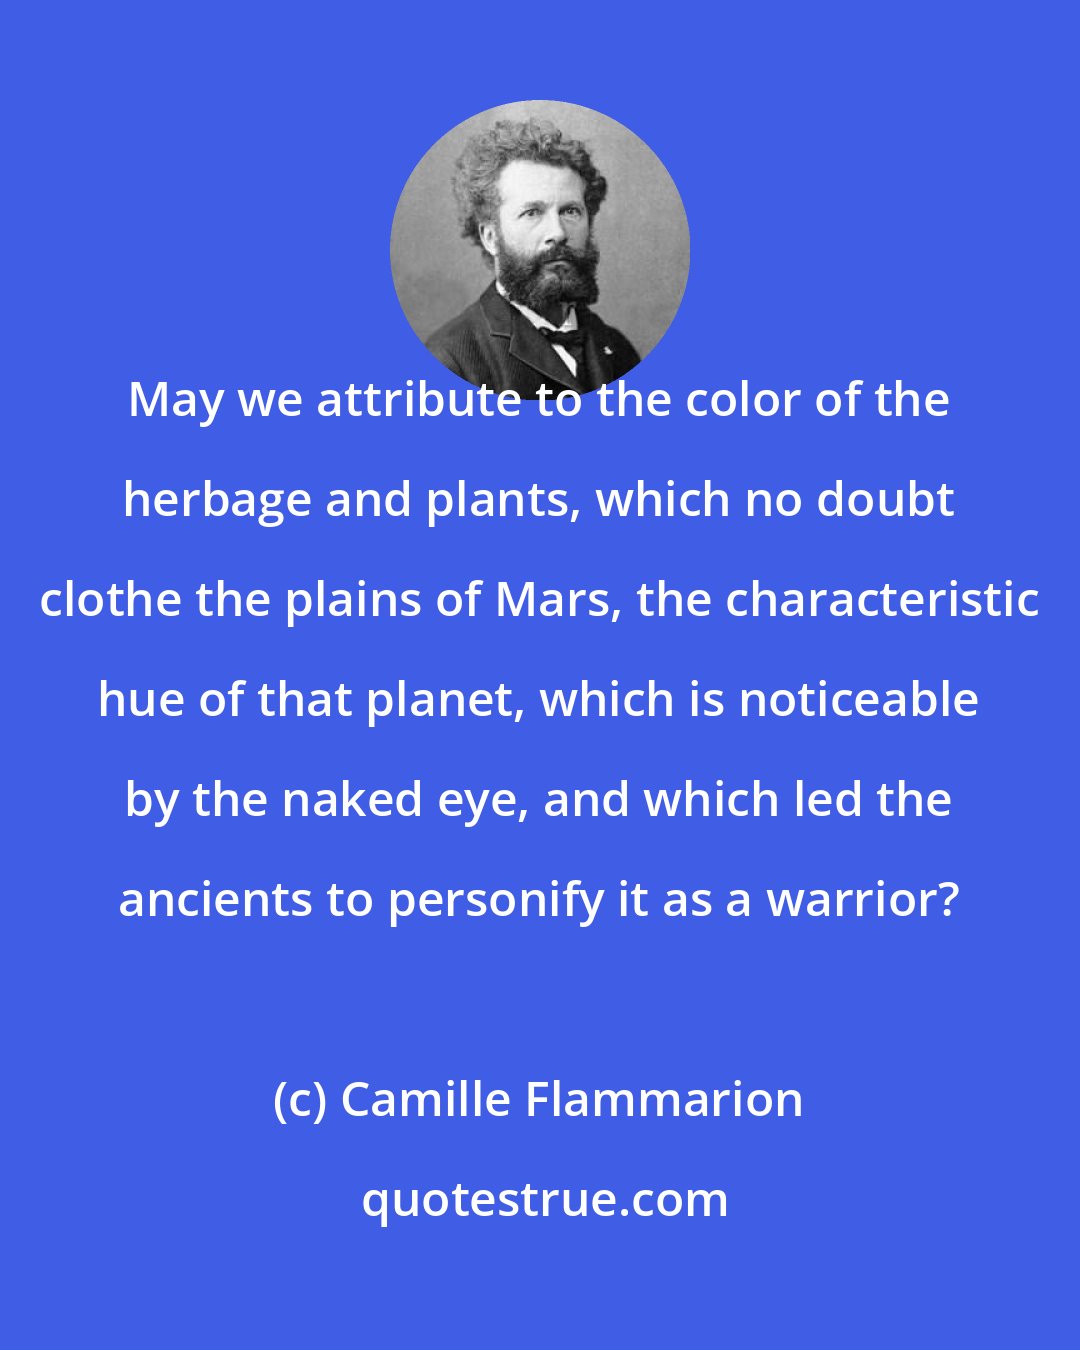 Camille Flammarion: May we attribute to the color of the herbage and plants, which no doubt clothe the plains of Mars, the characteristic hue of that planet, which is noticeable by the naked eye, and which led the ancients to personify it as a warrior?